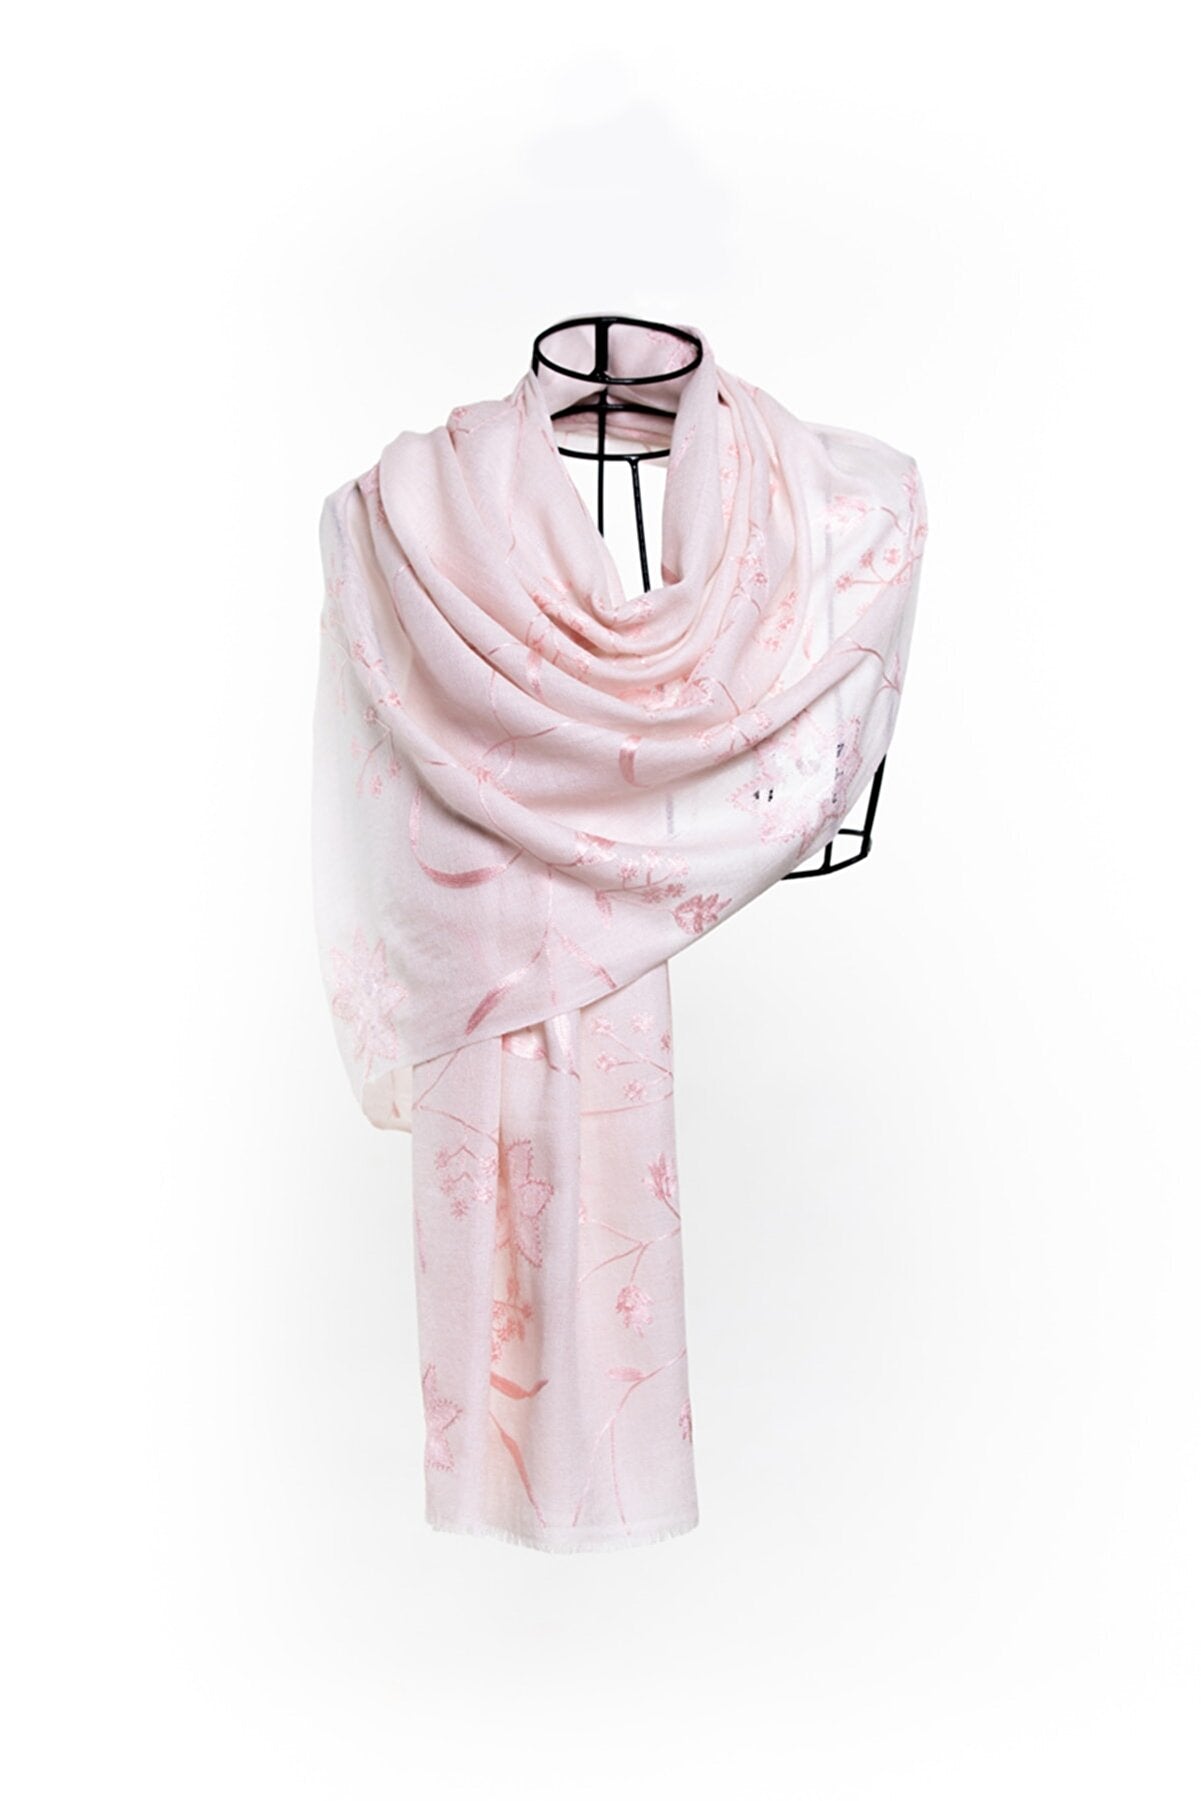 Lace & Embroidery Floral Sheer Shawl - Baby Pink